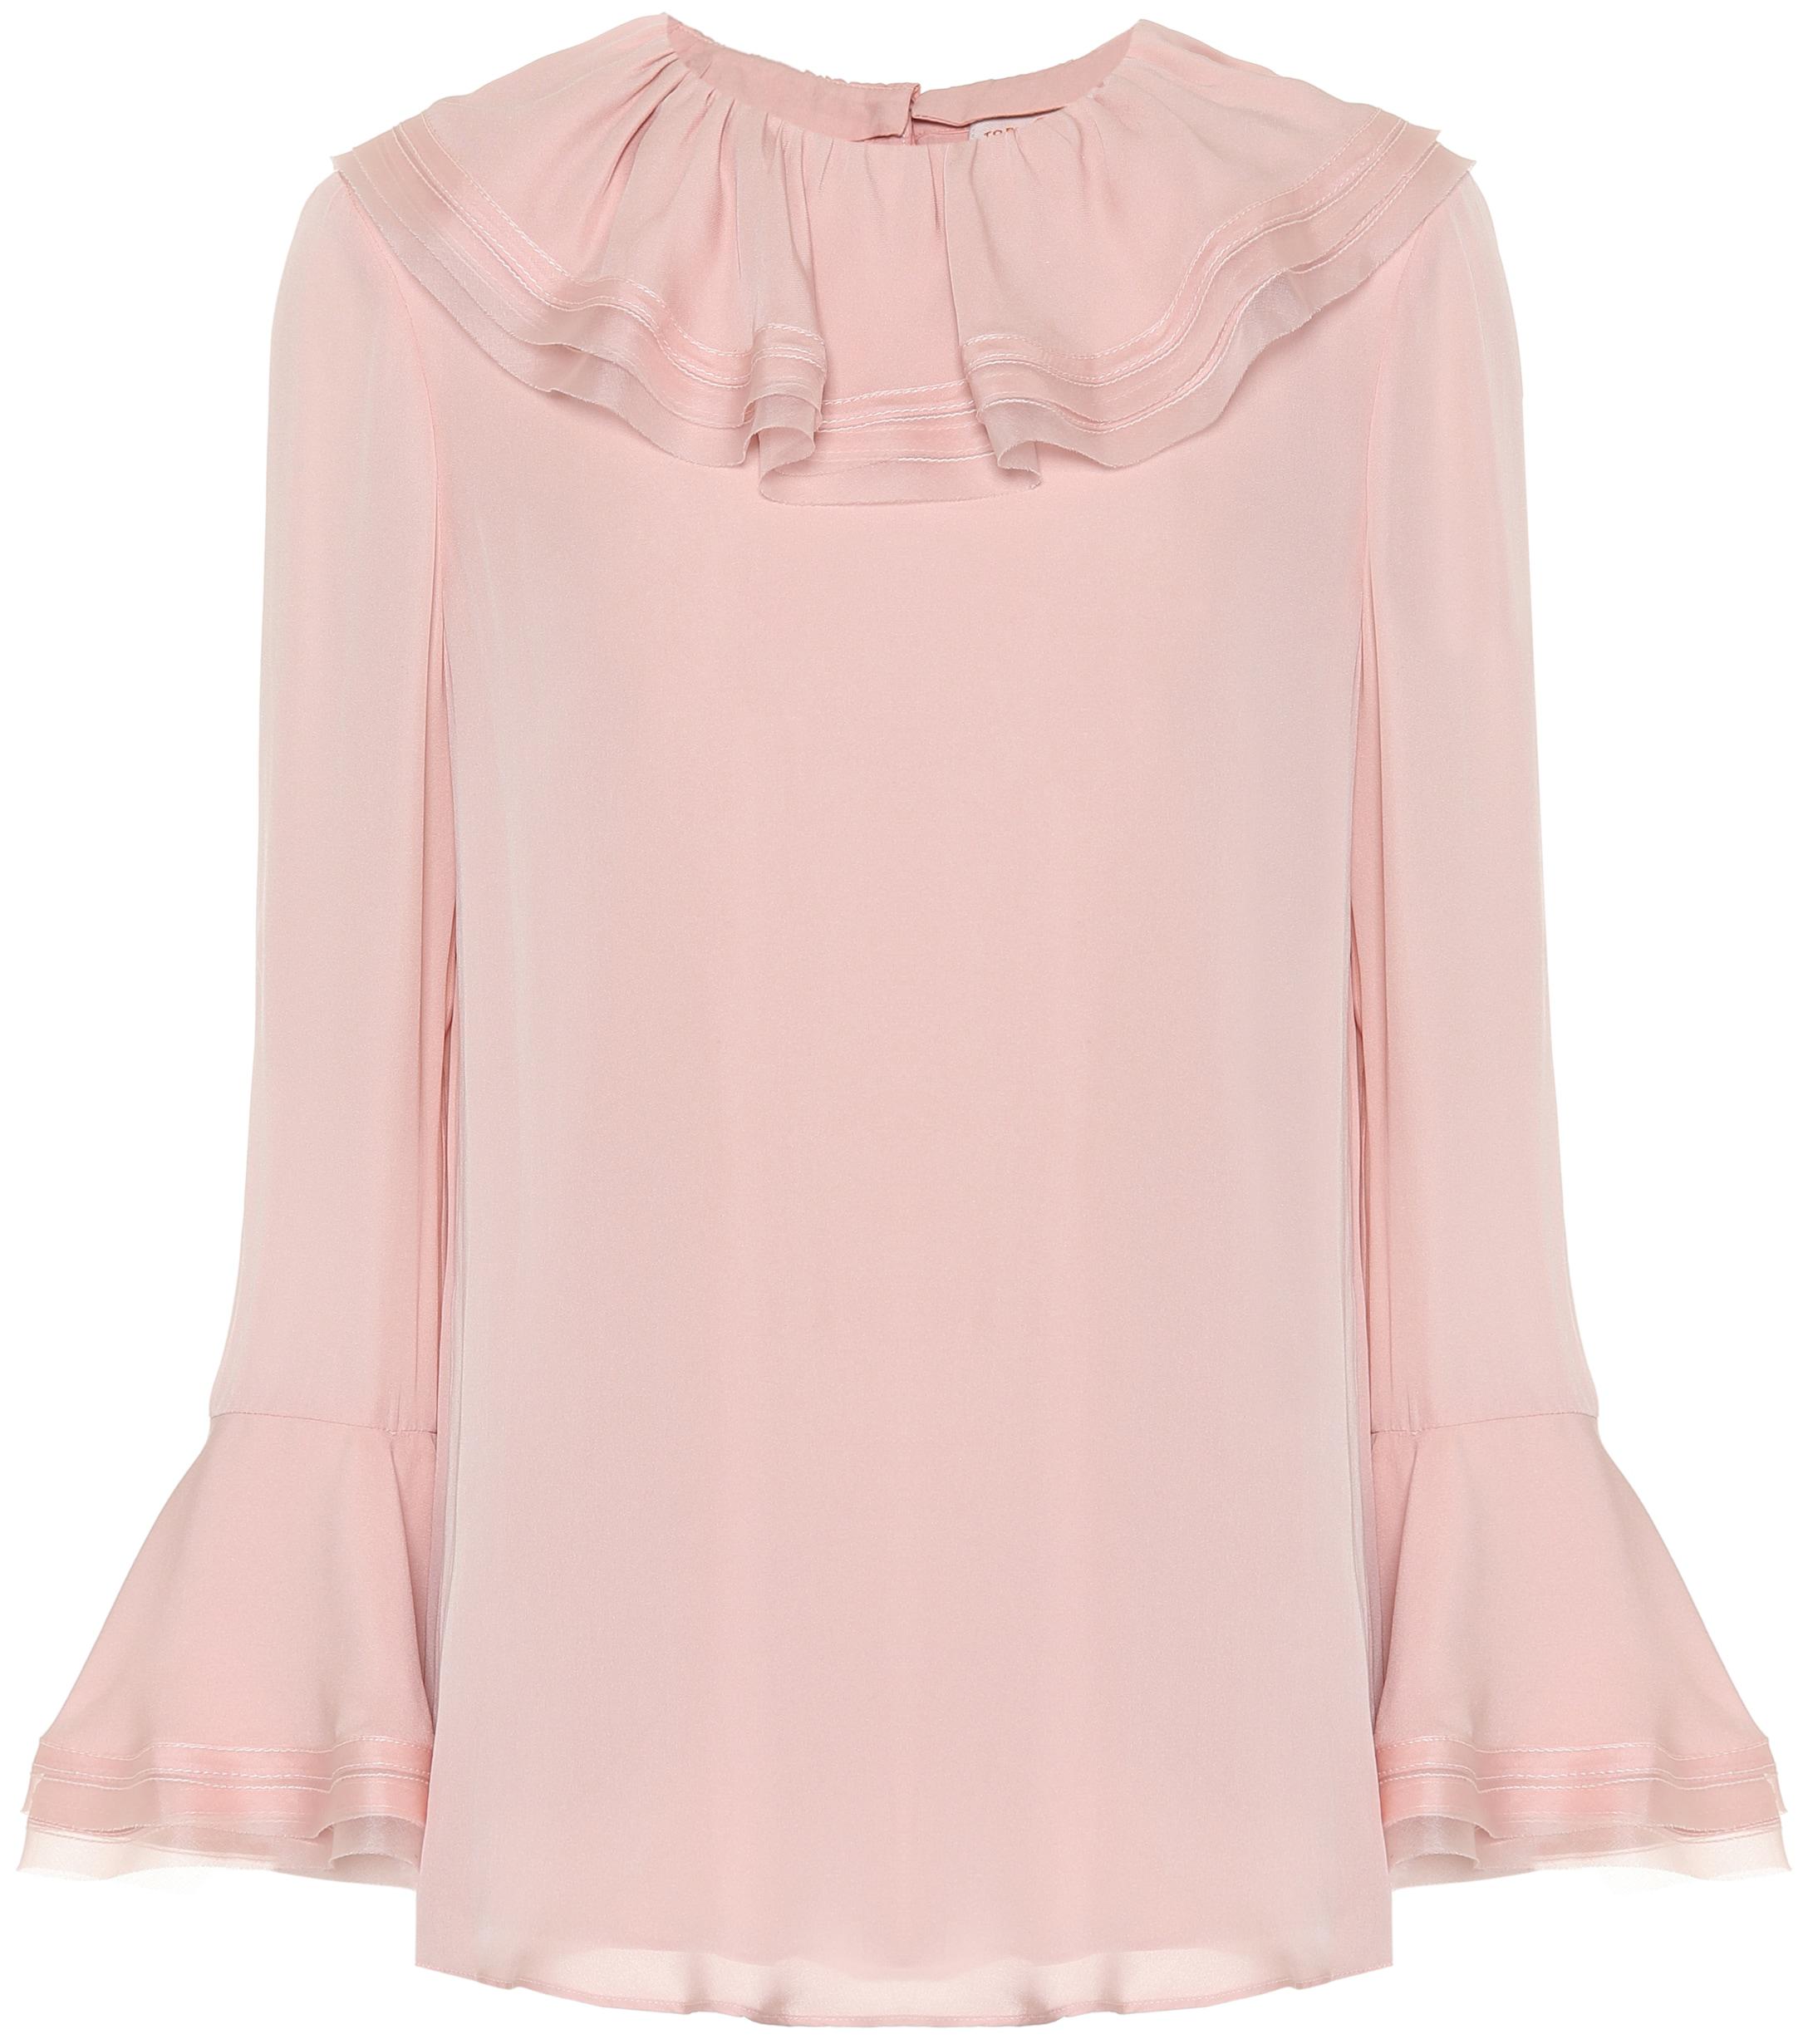 Tory Burch Silk Blouse With Ruffles in Pink - Lyst